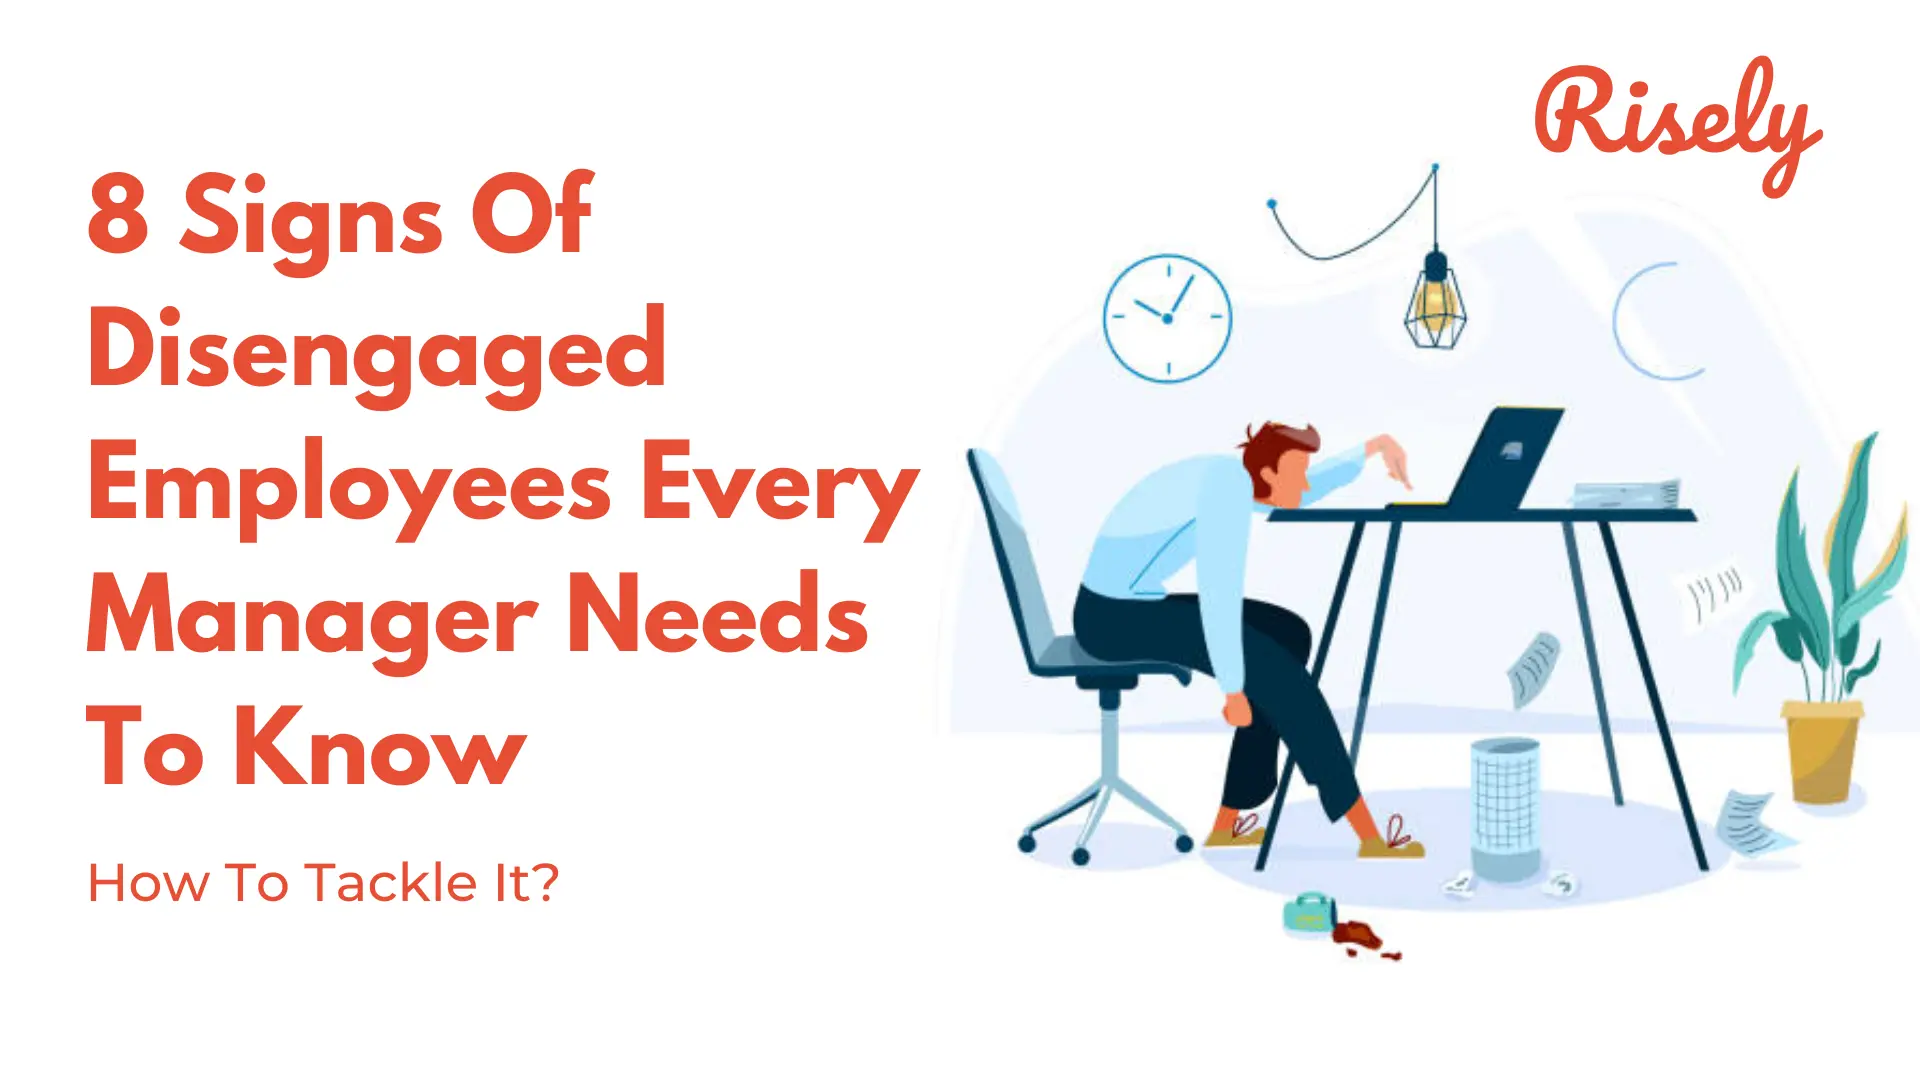 8 Signs Of Disengaged Employees Every Manager Needs To Know